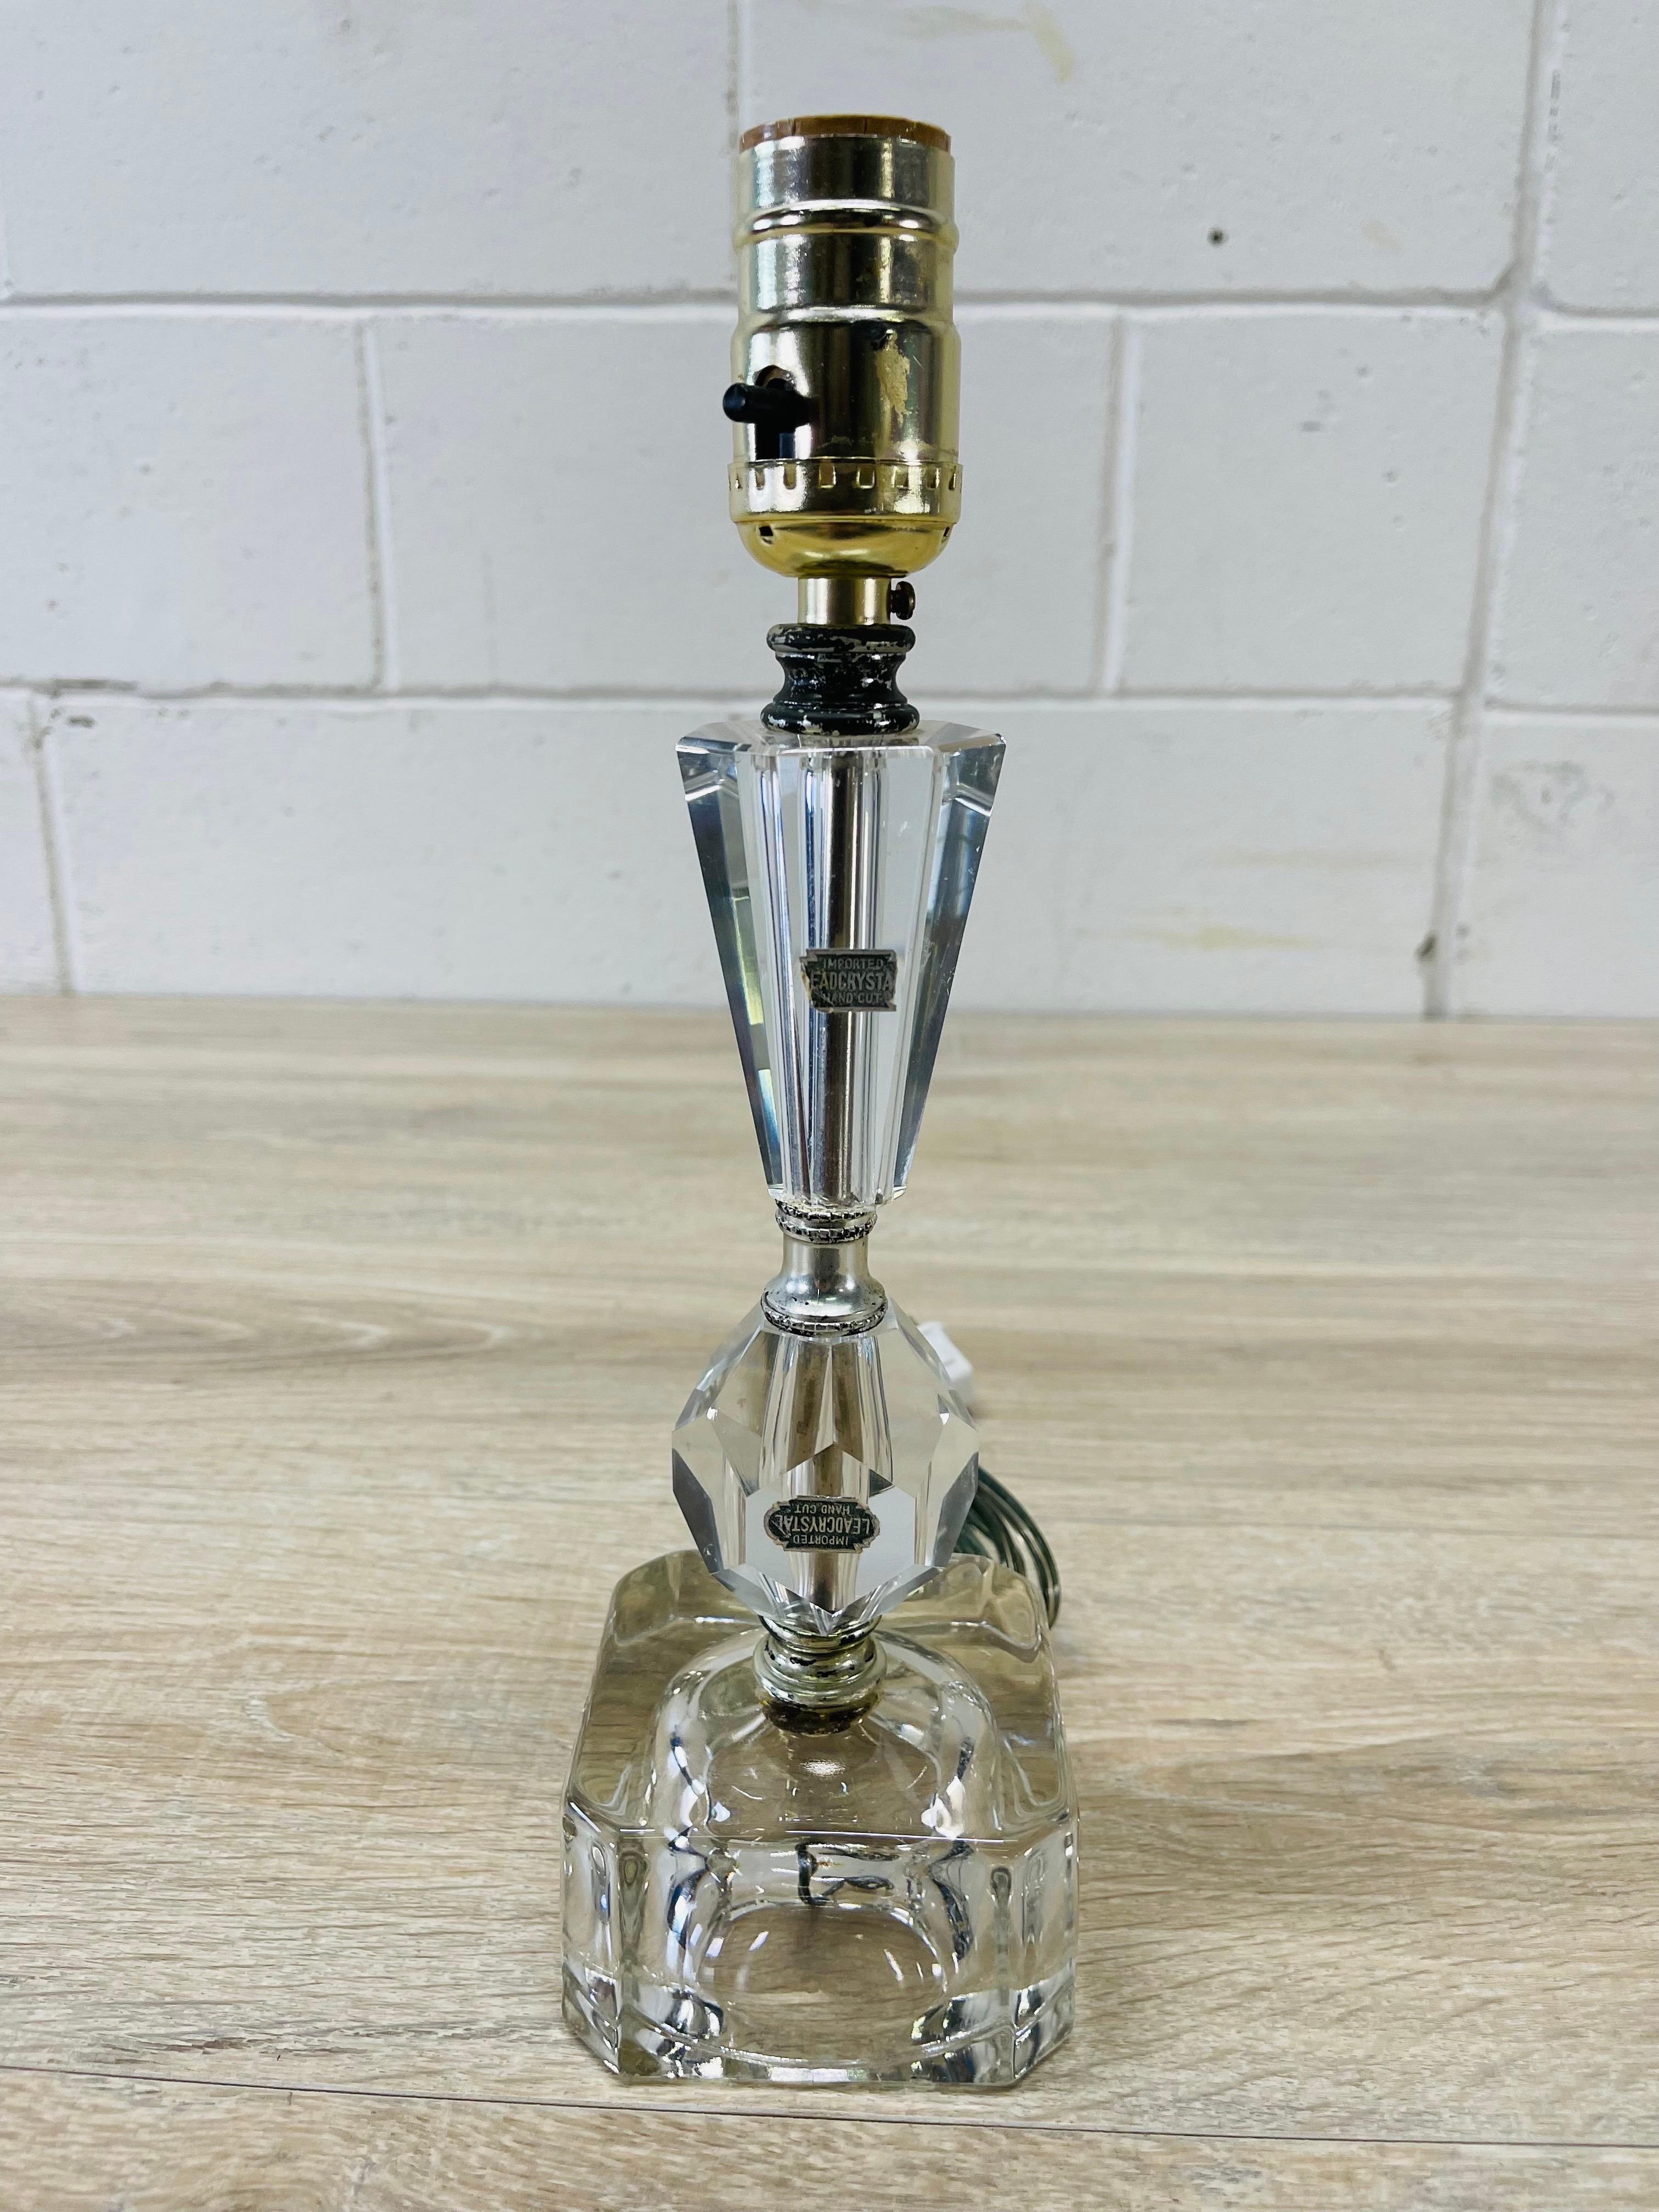 Vintage 1950s lead crystal table lamp. Wired for the US and in working condition. Uses a standard 75W bulb. Marked with a label.